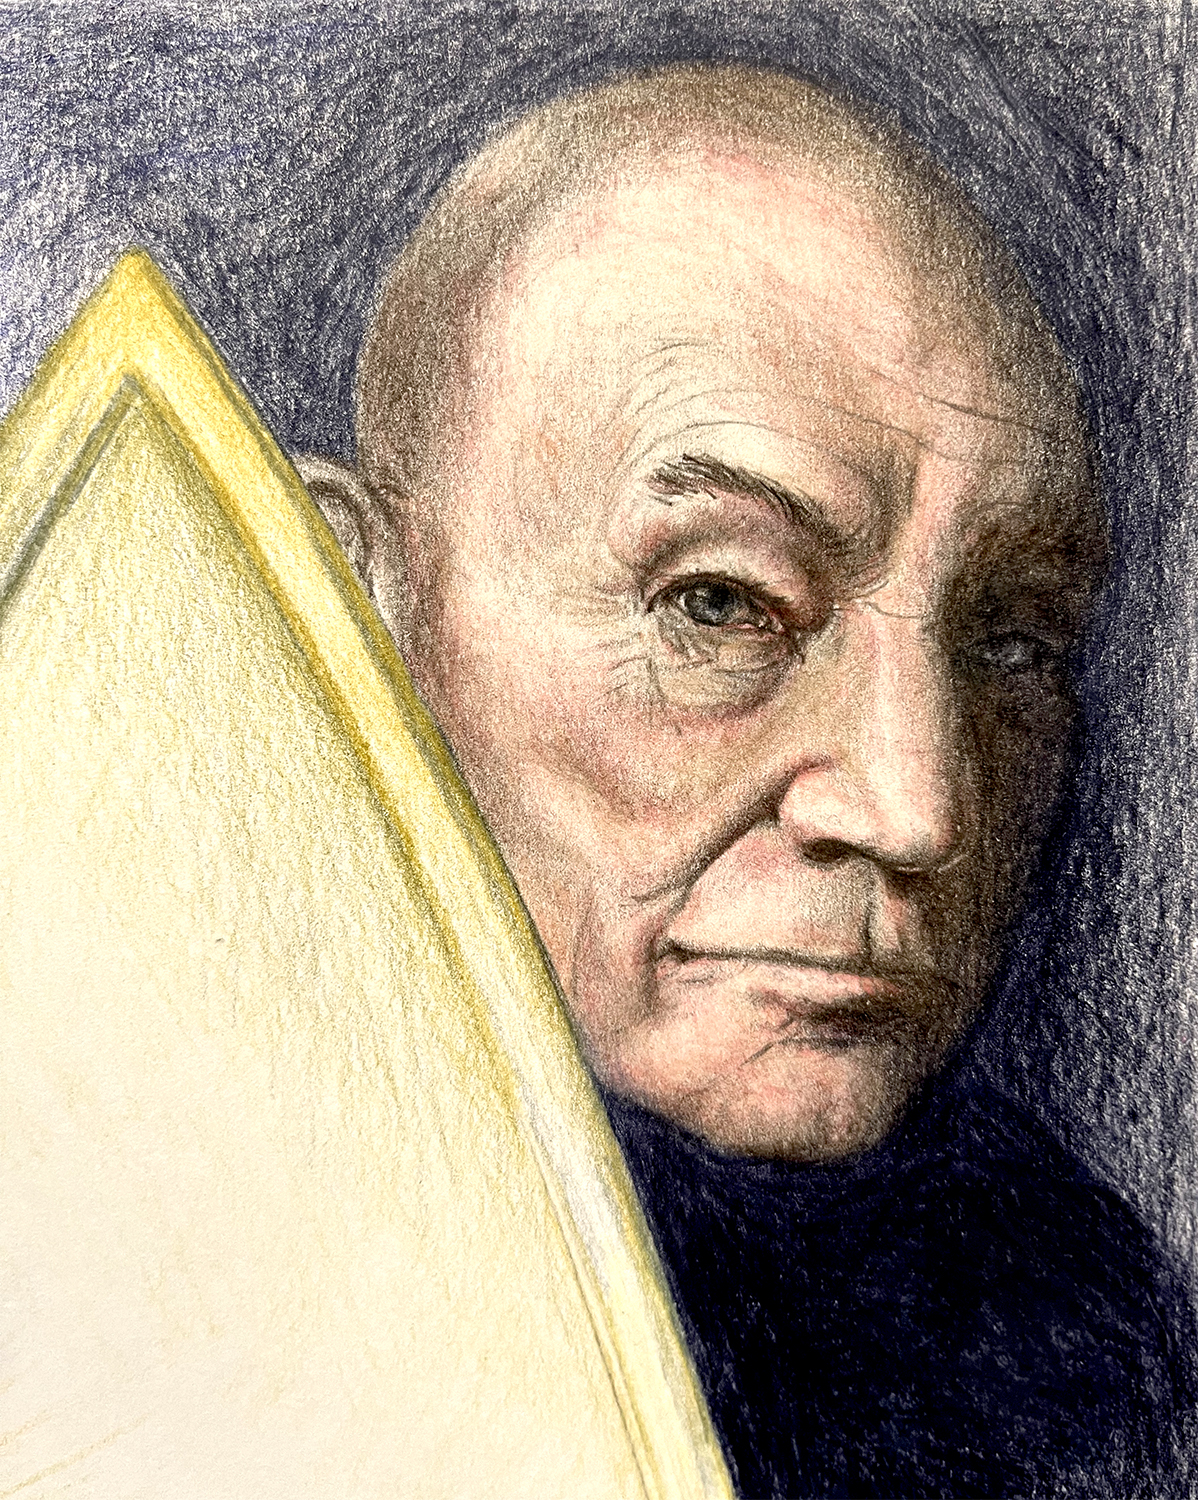 Drawing of Picard